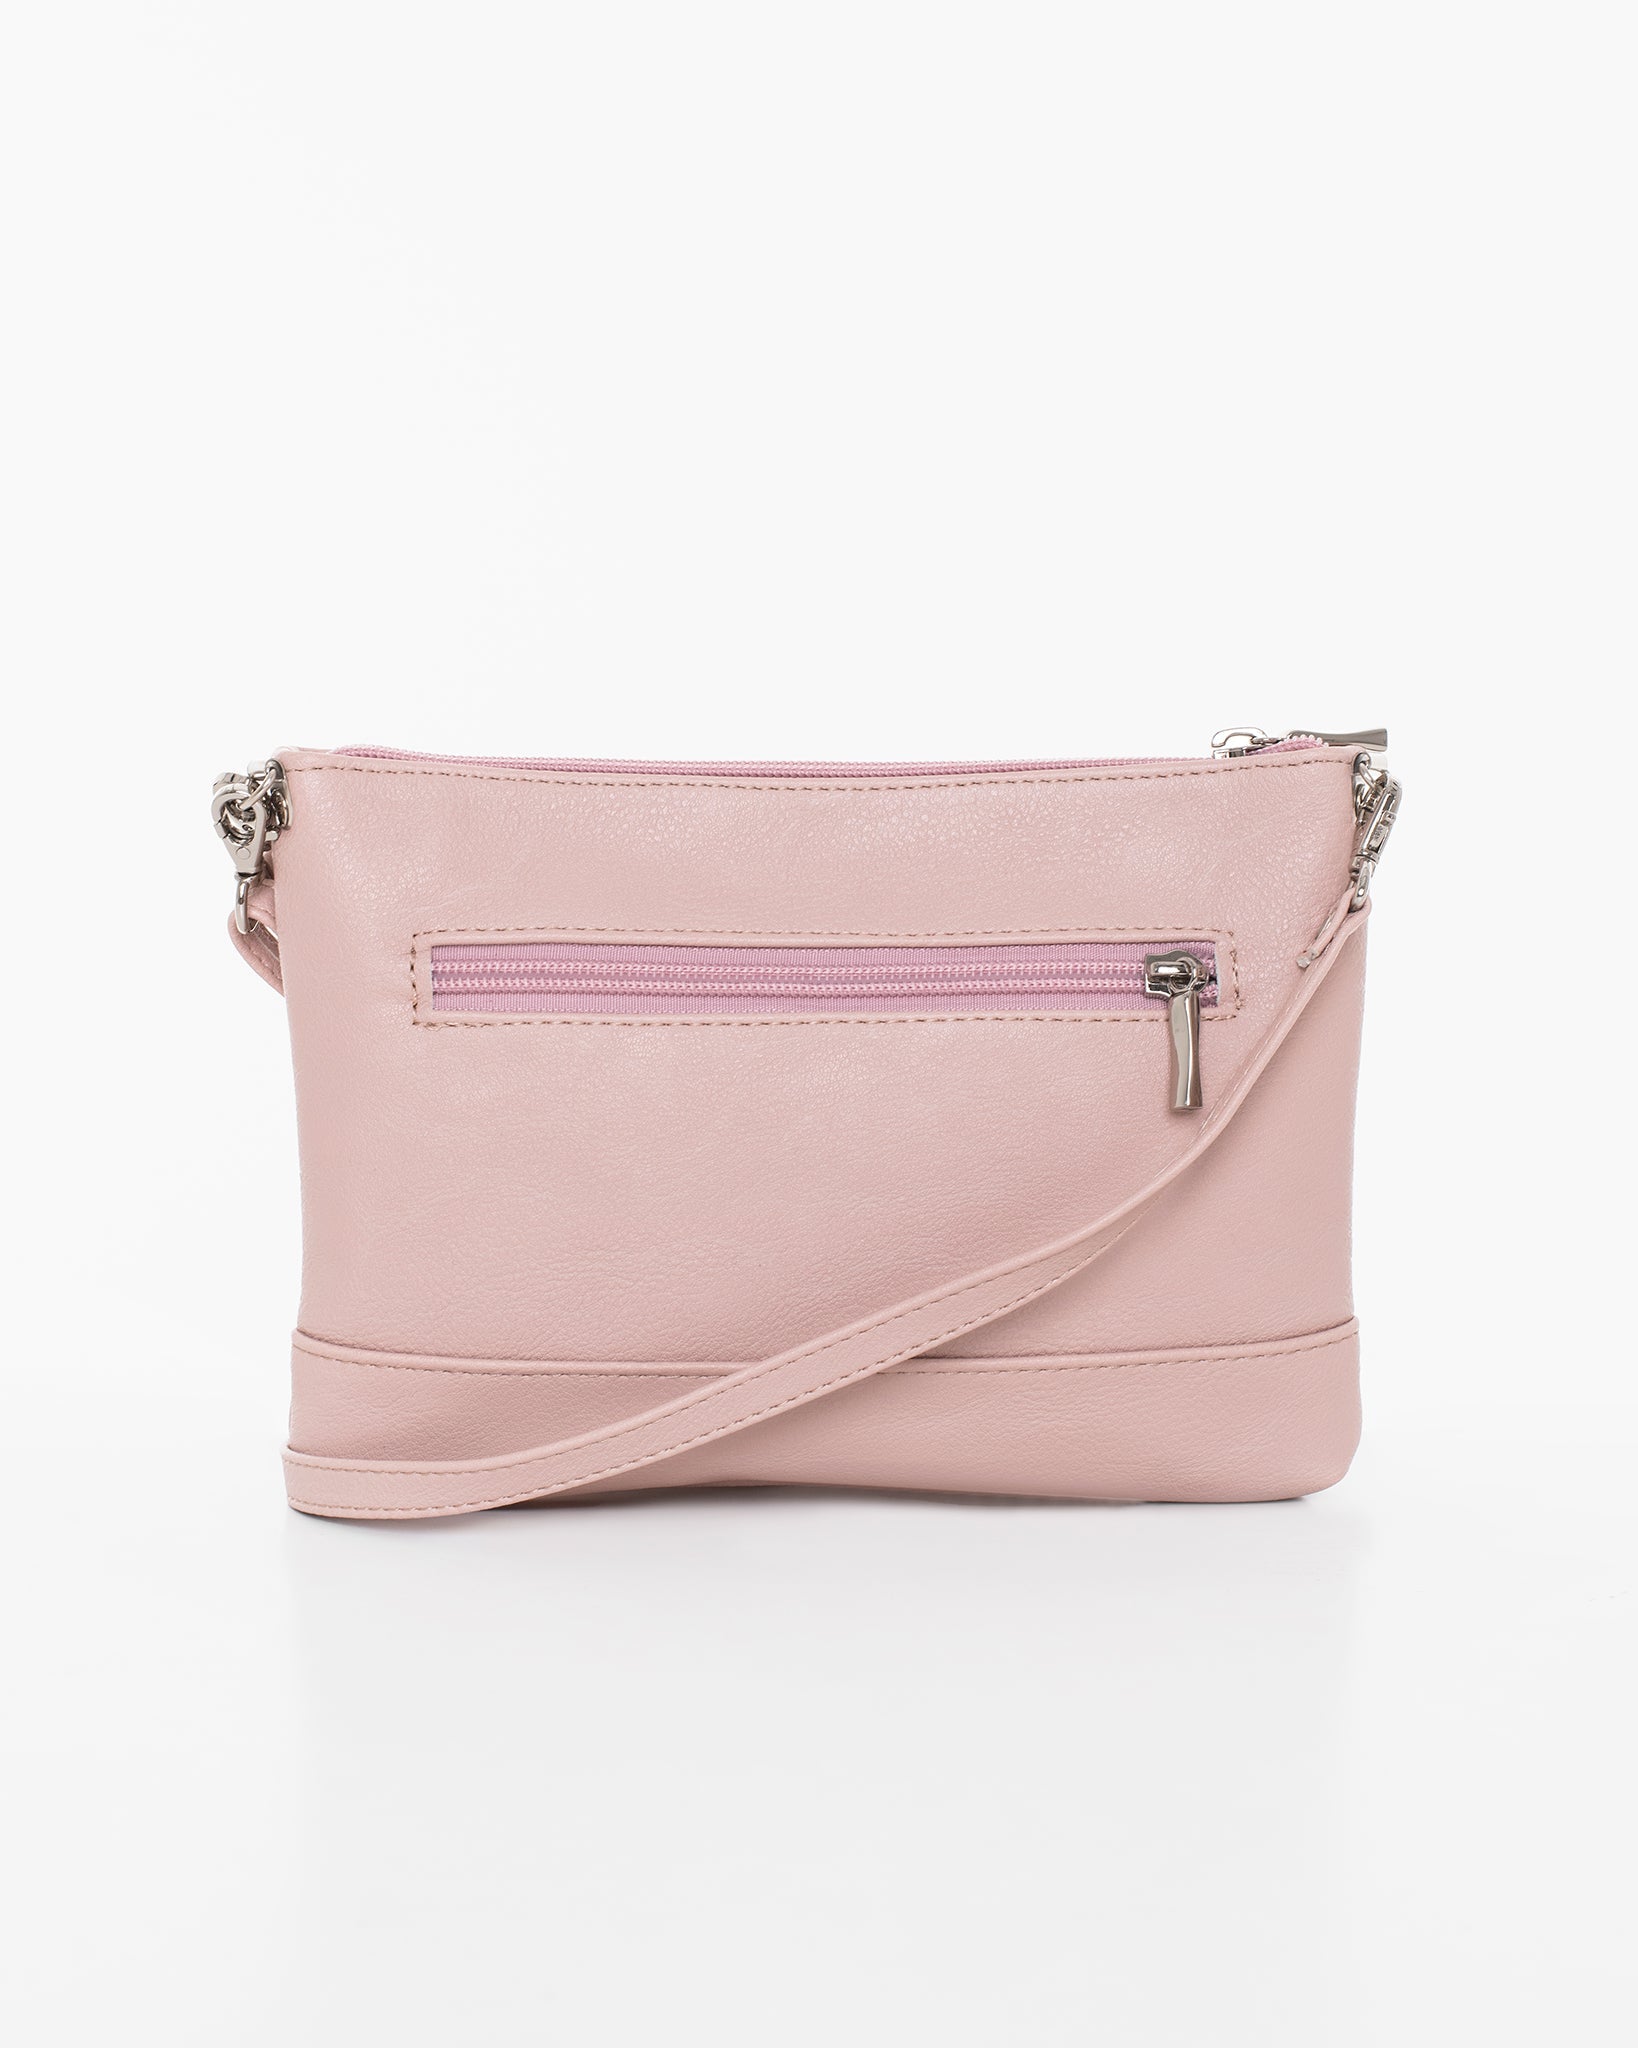 A popular Nabo Shoulder Bag - Nude with multiple zippered pockets, removable shoulder and wrist straps. Made in Finland. Dimensions: 22 x 15 x 3 cm.